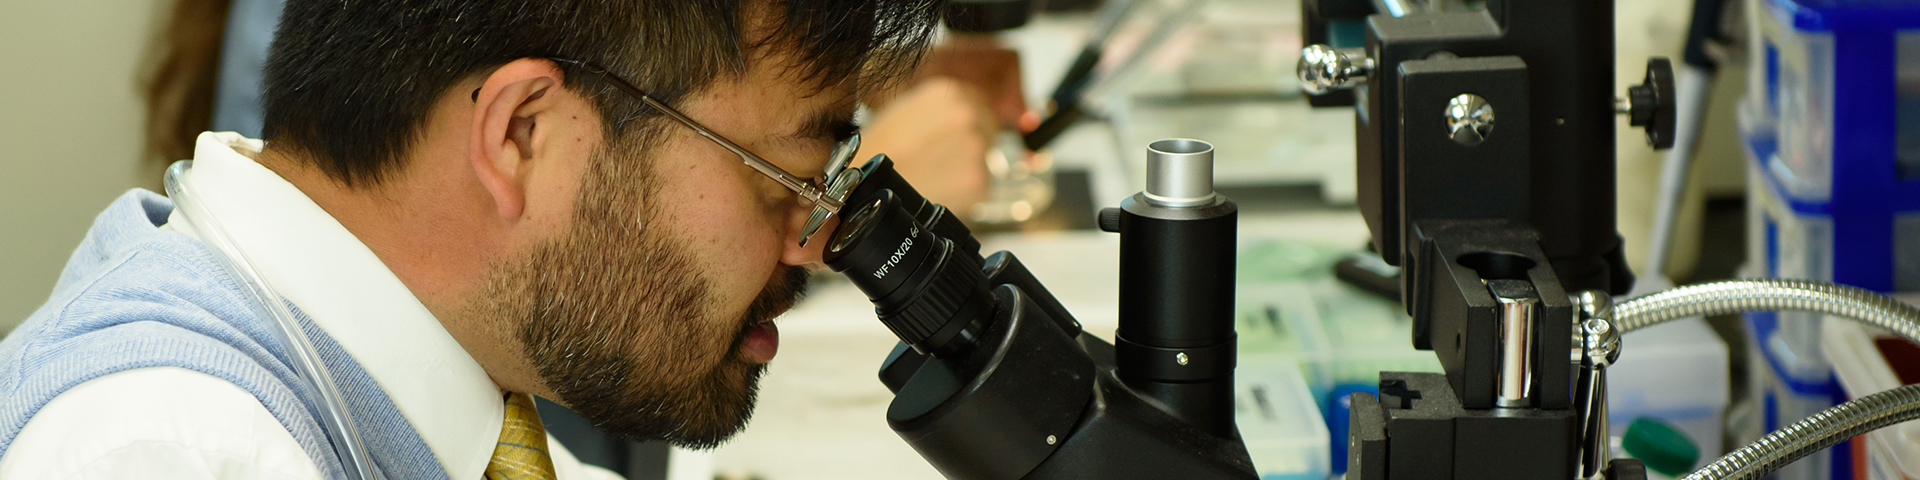 Post doc working in lab looking in microscope